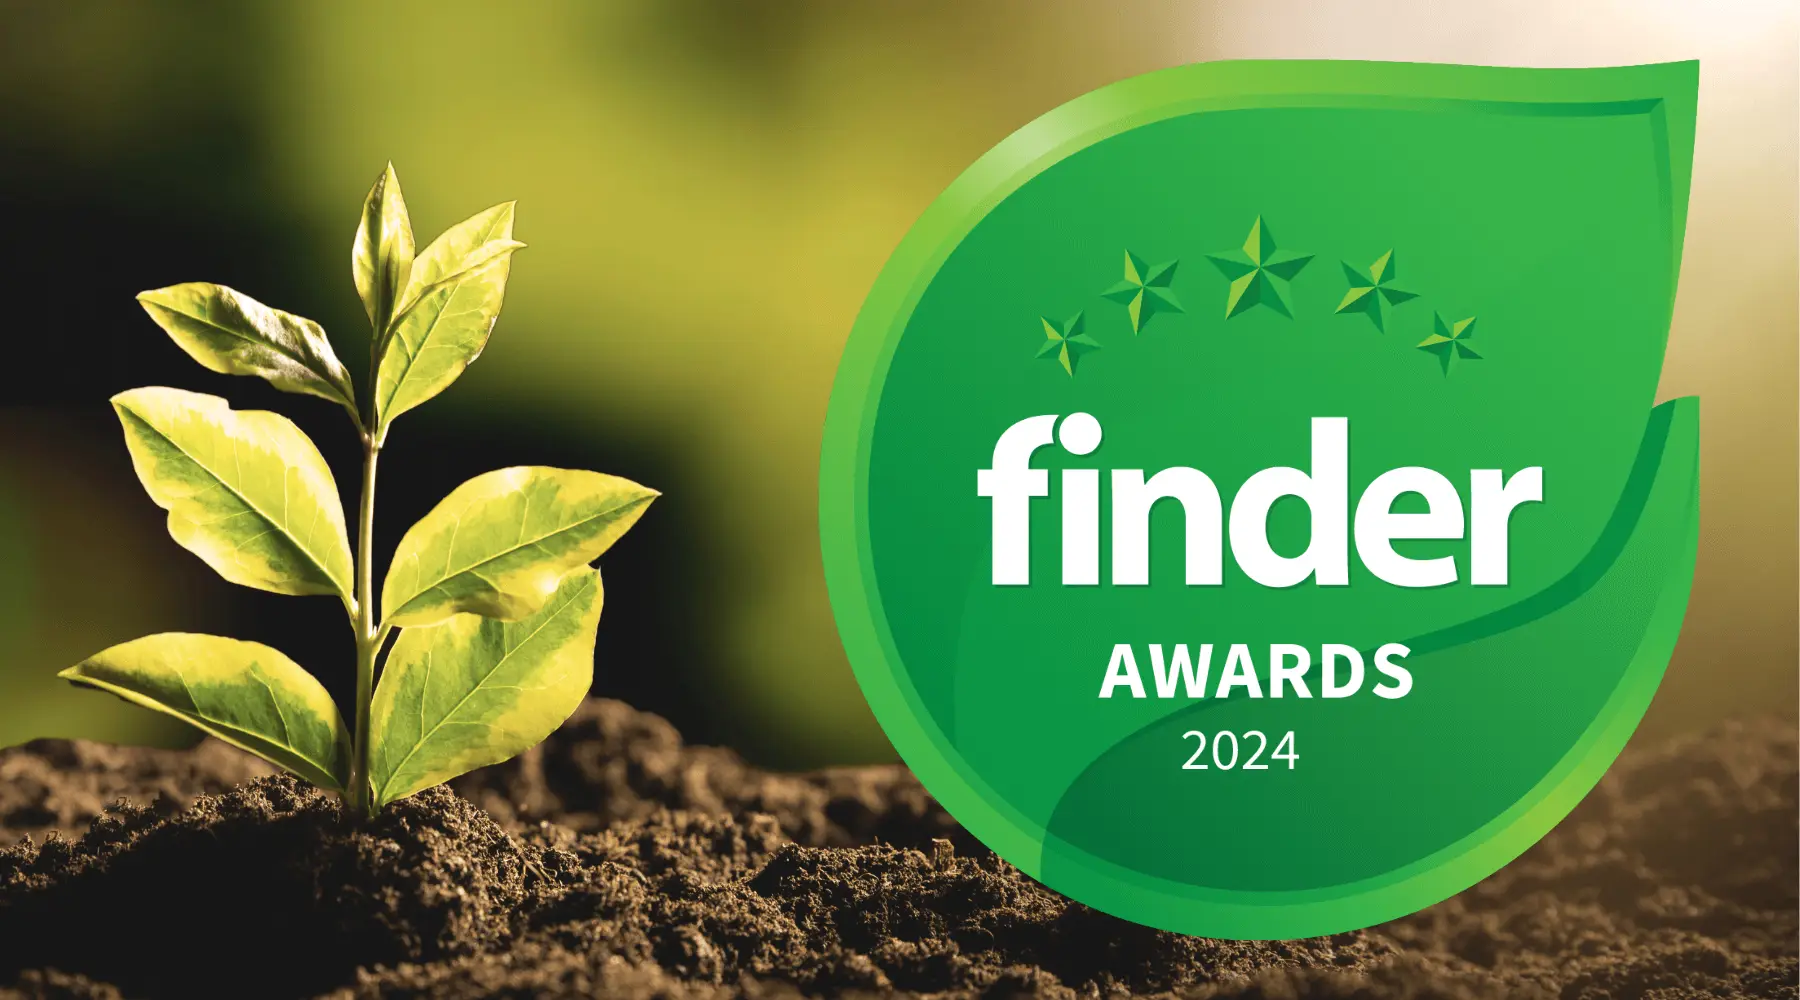 Finder Green Awards badge next to a sapling growing from some soil